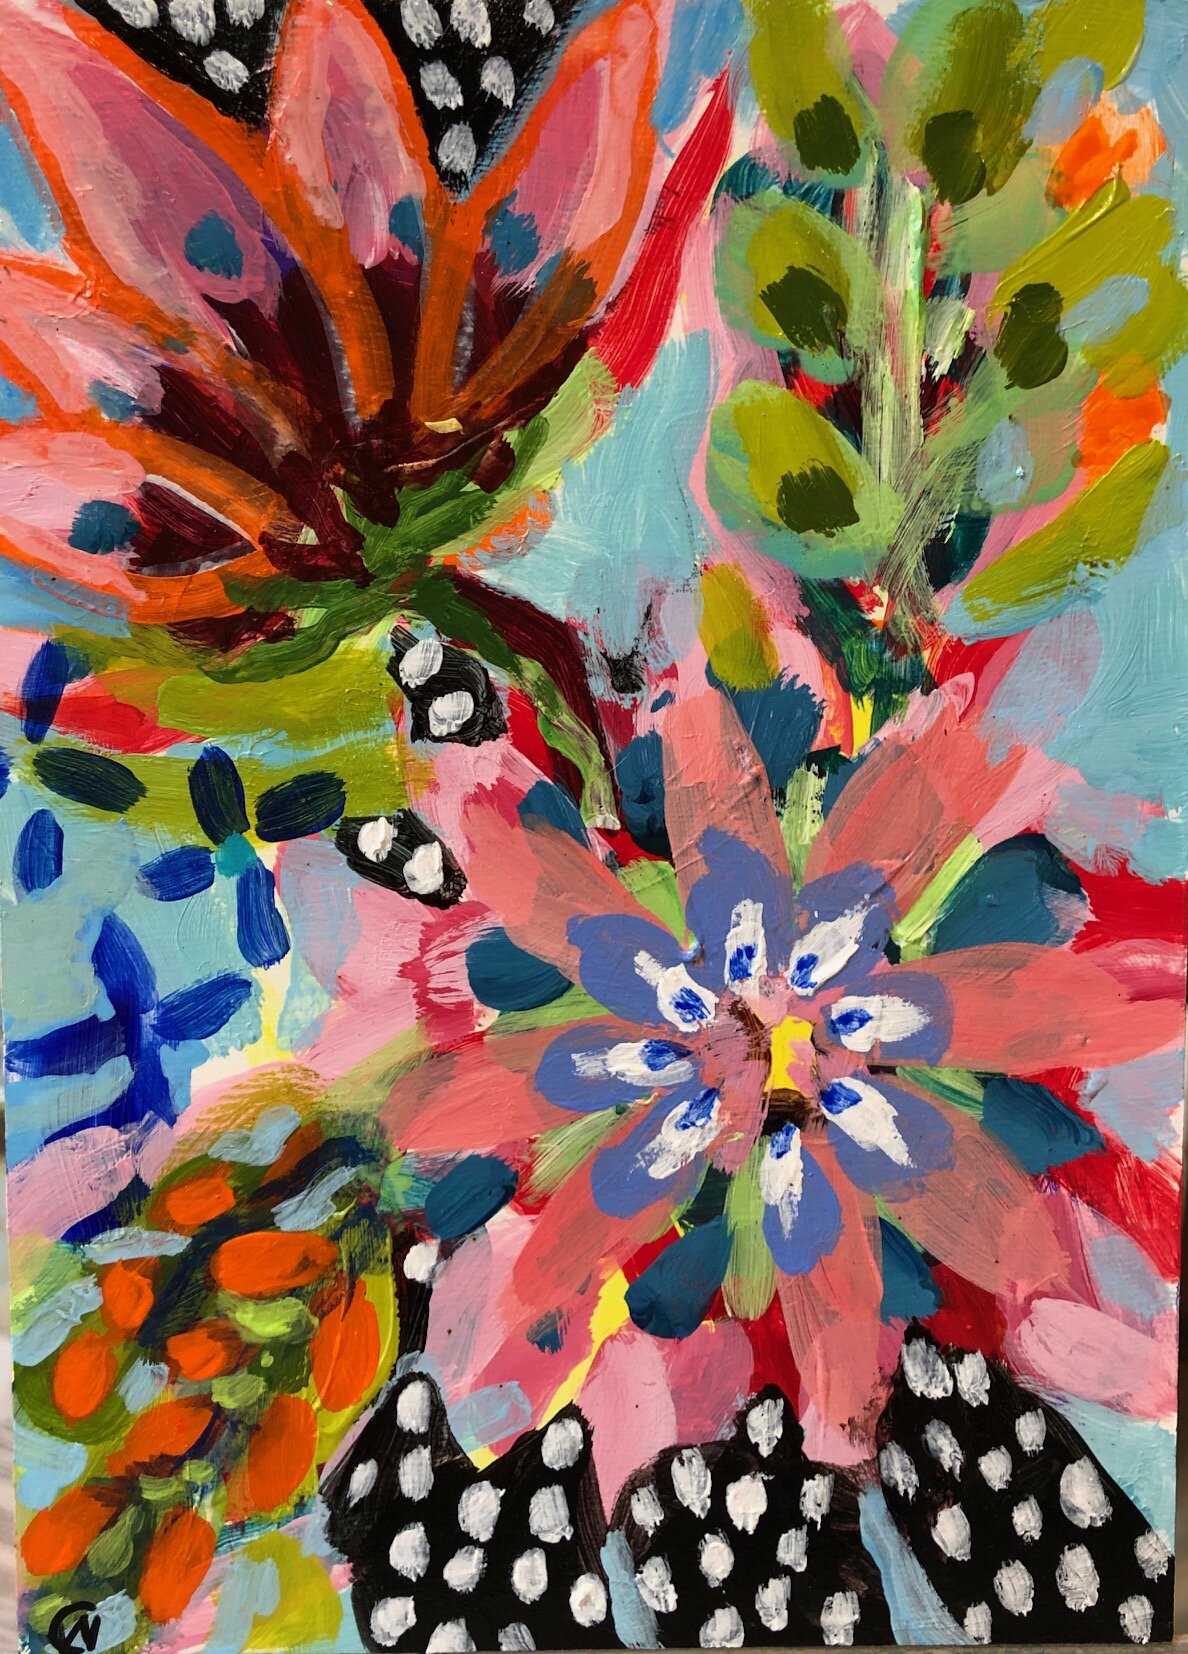 Floral Dance 11, Acrylic on board, 5"x7" SOLD